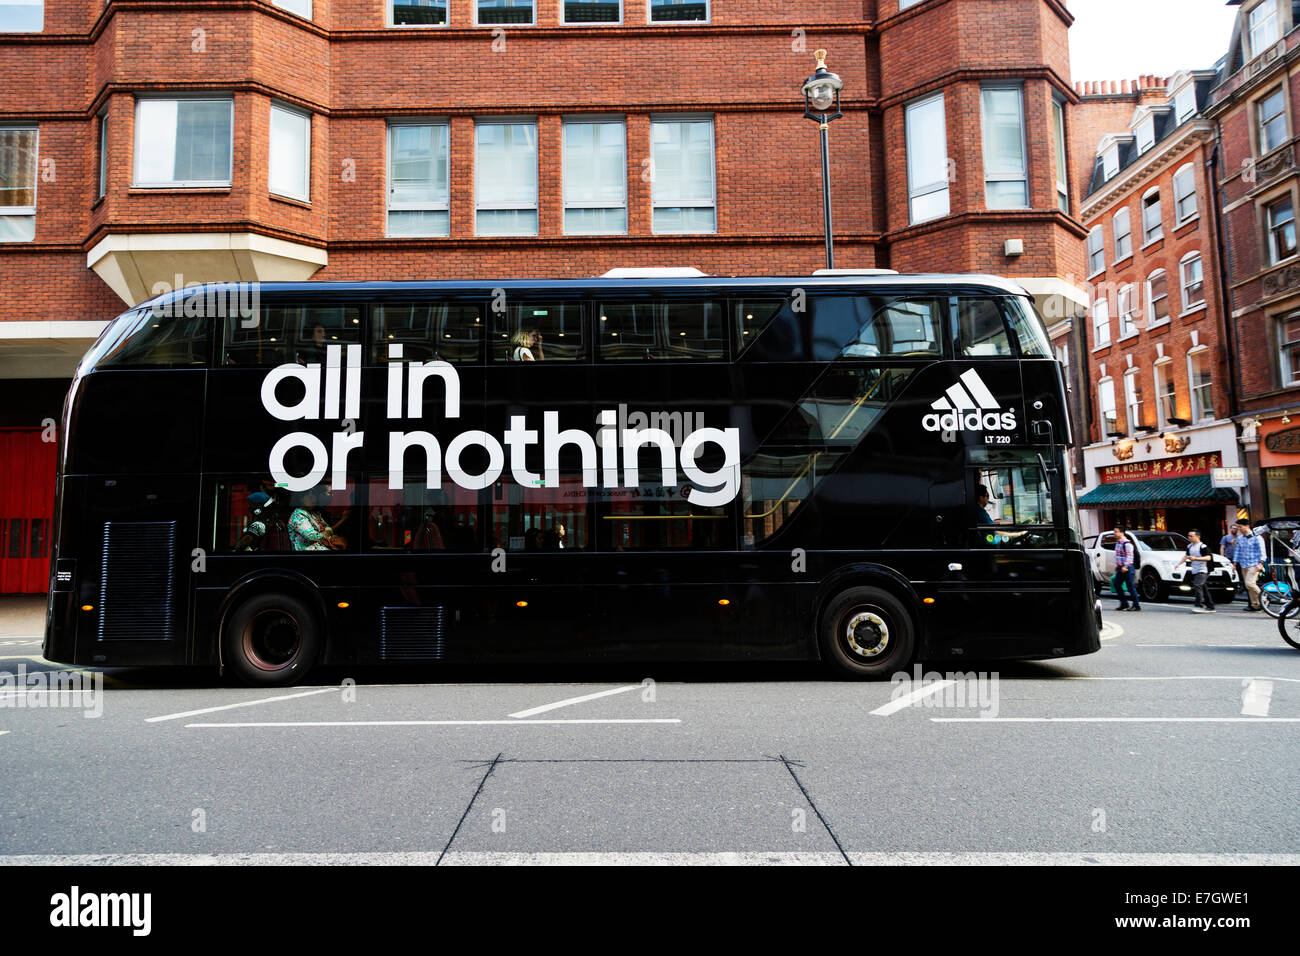 Adidas Black Livery Bus High Resolution Stock Photography and Images - Alamy